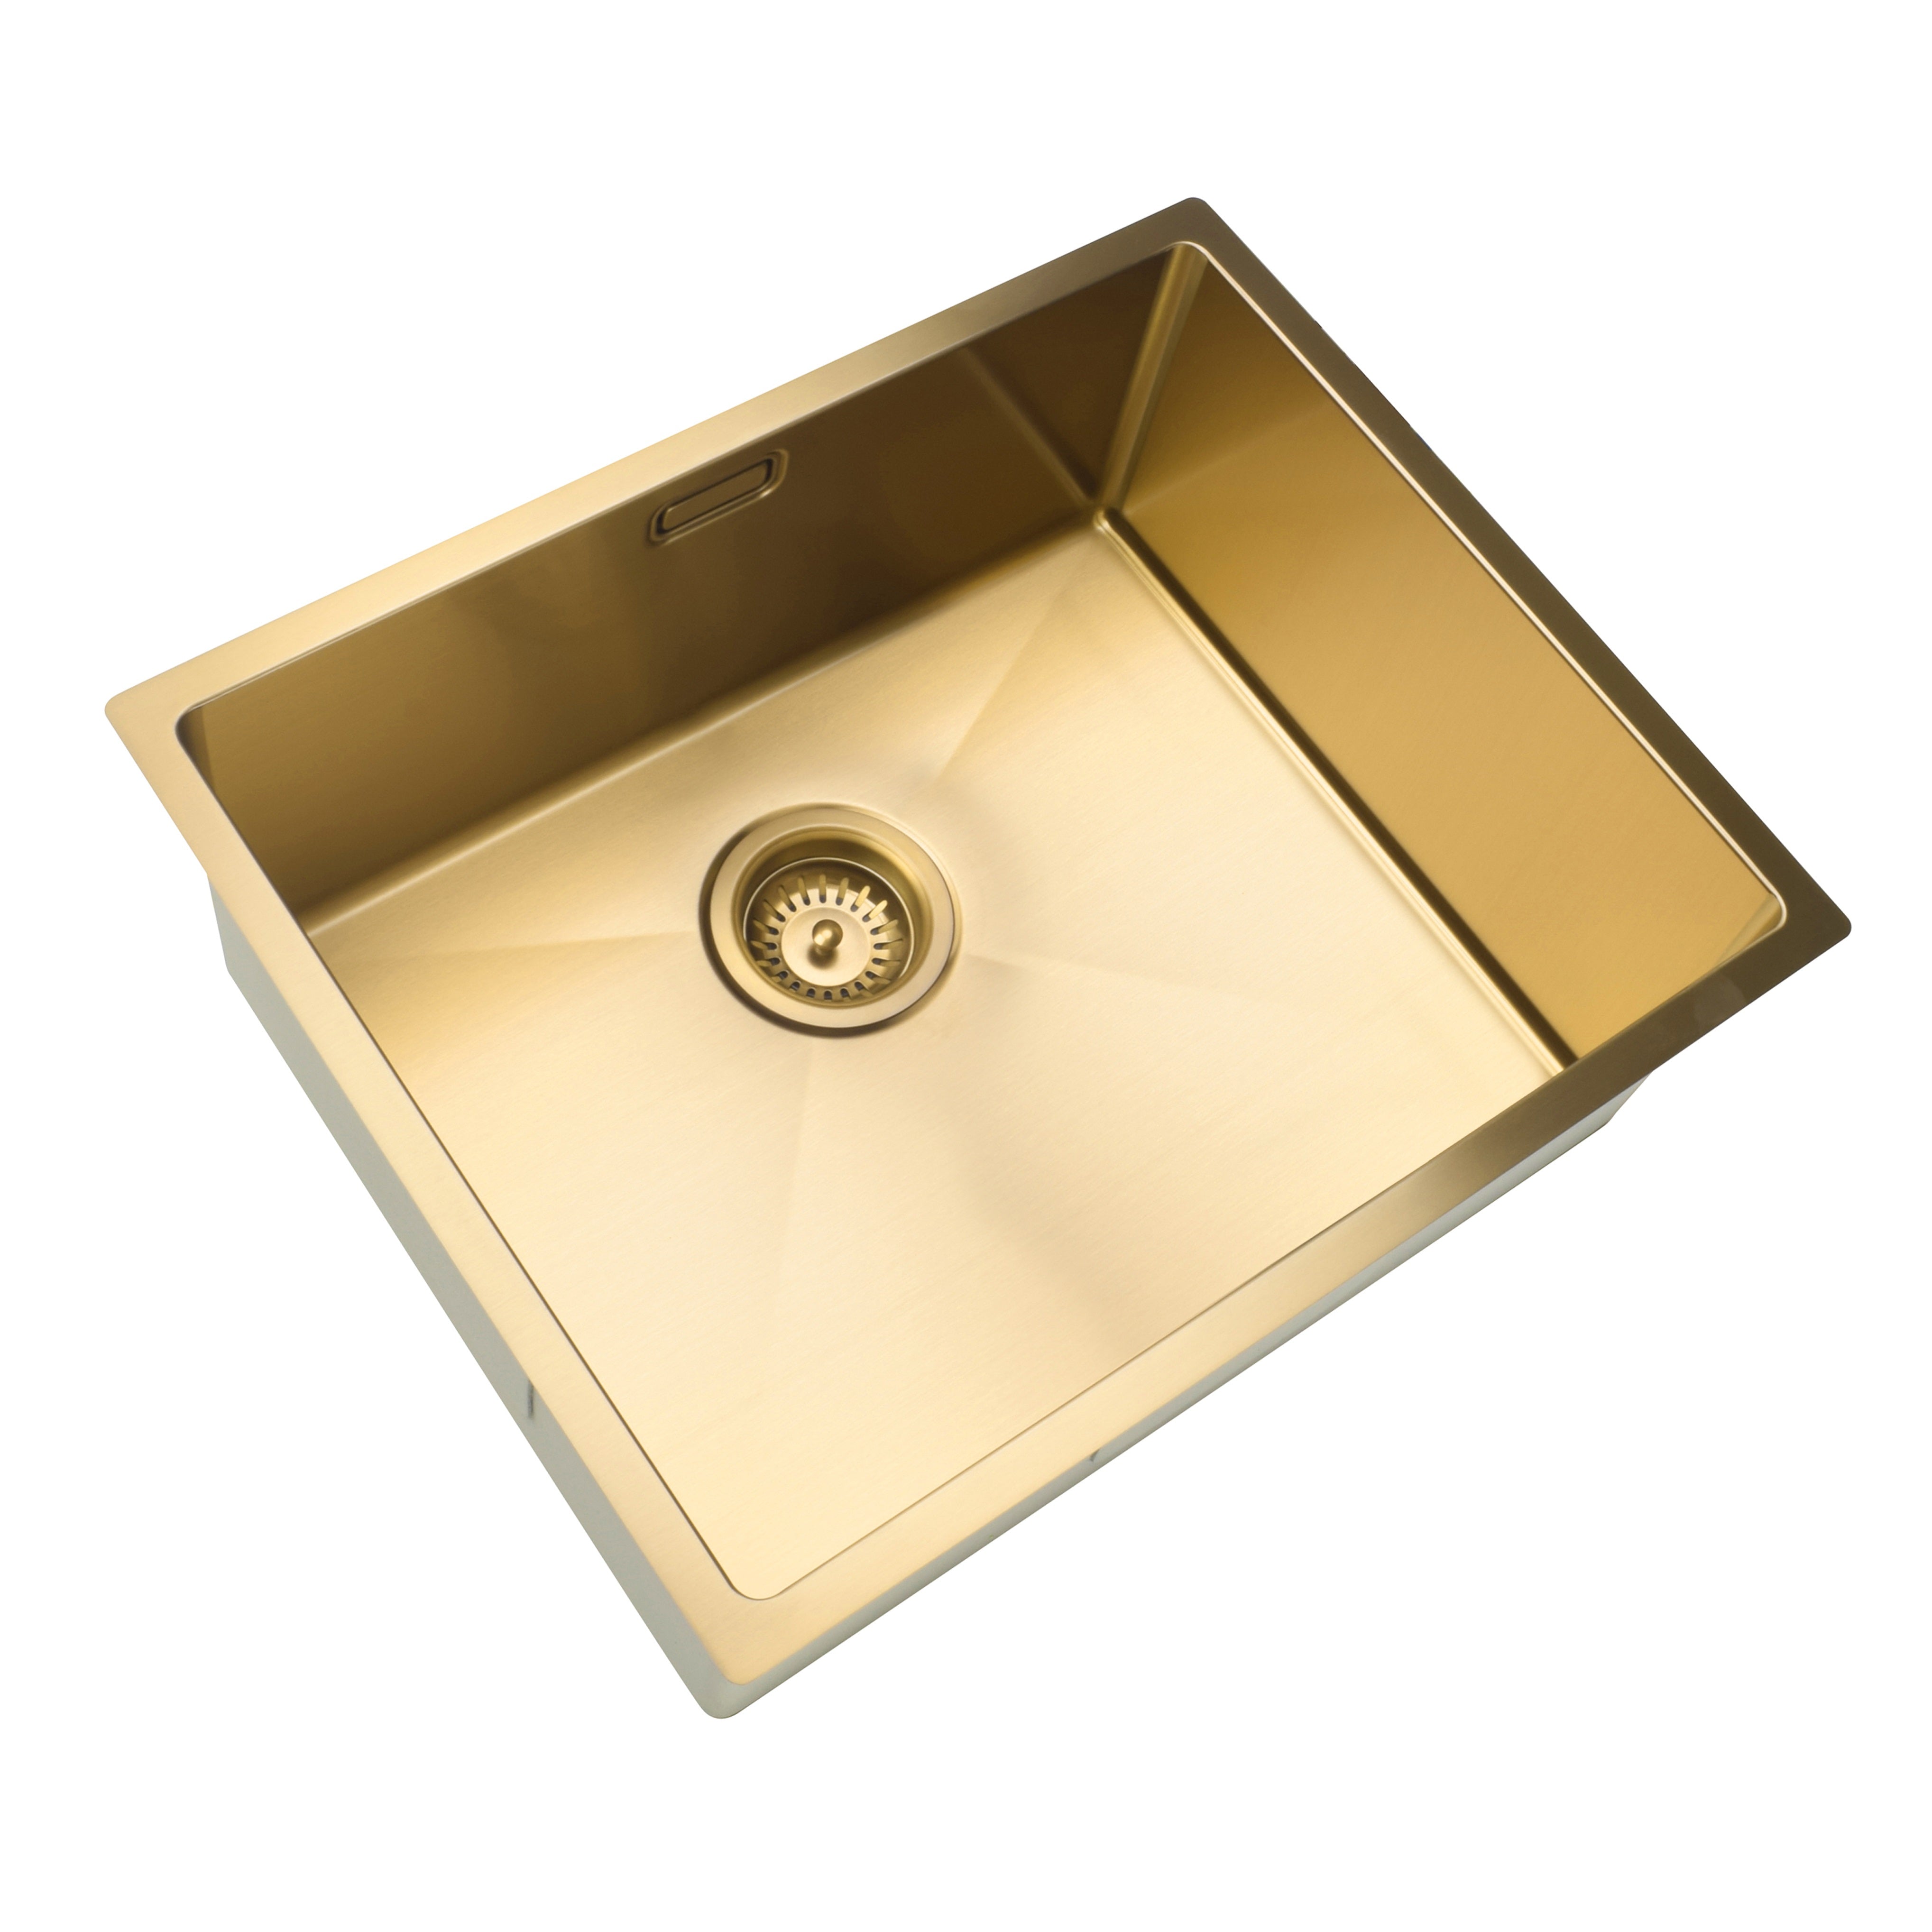 ASPEN 500X400 PVD 304 STAINLESS STEEL SINKS - 5 COLOURS